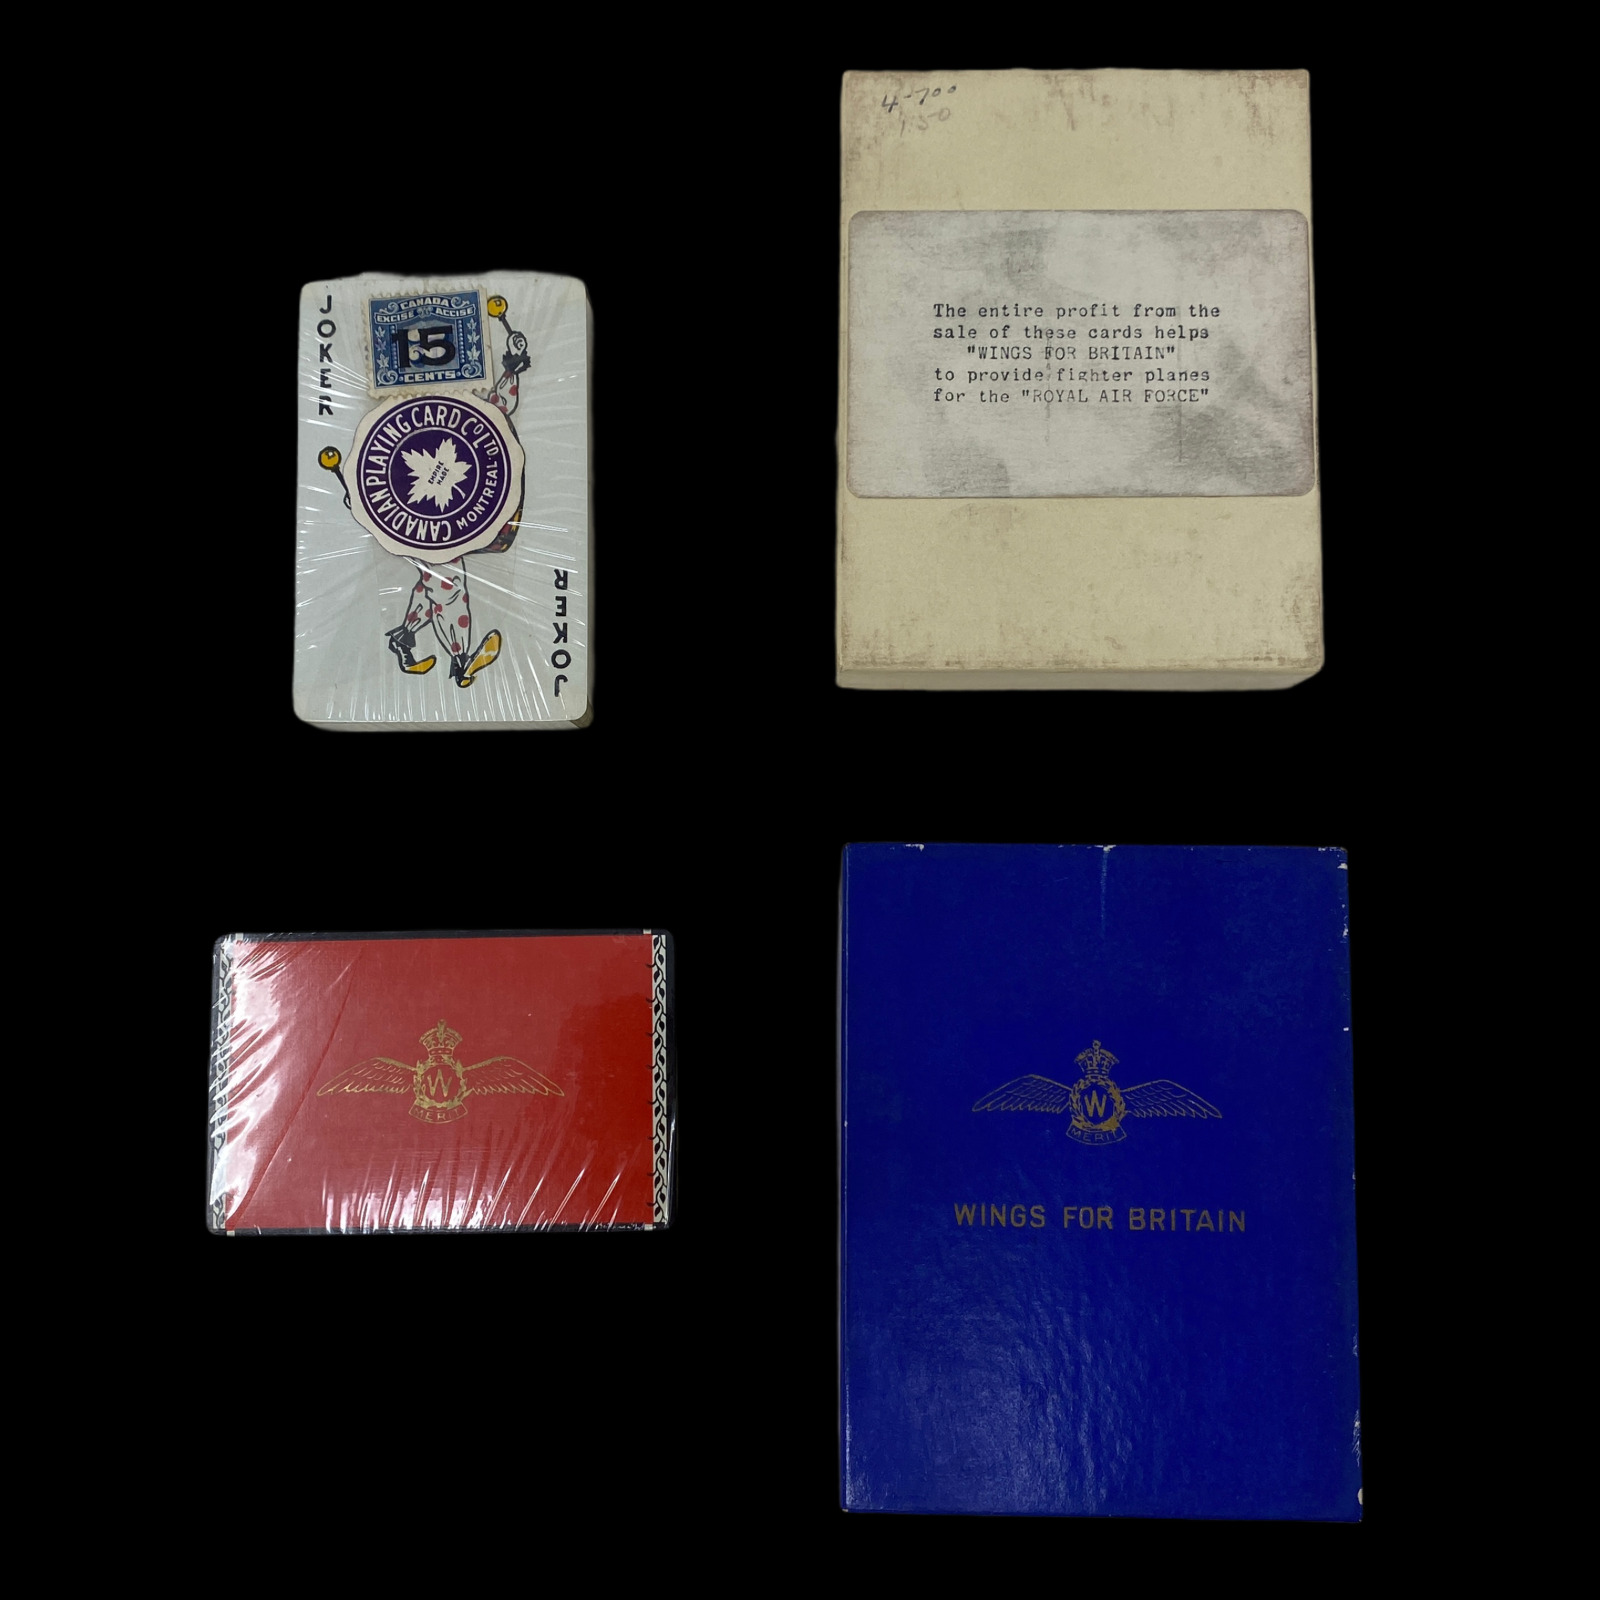 WWII ULTRA RARE Mint Condition Unopened Wings For Britain RAF Playing Cards 